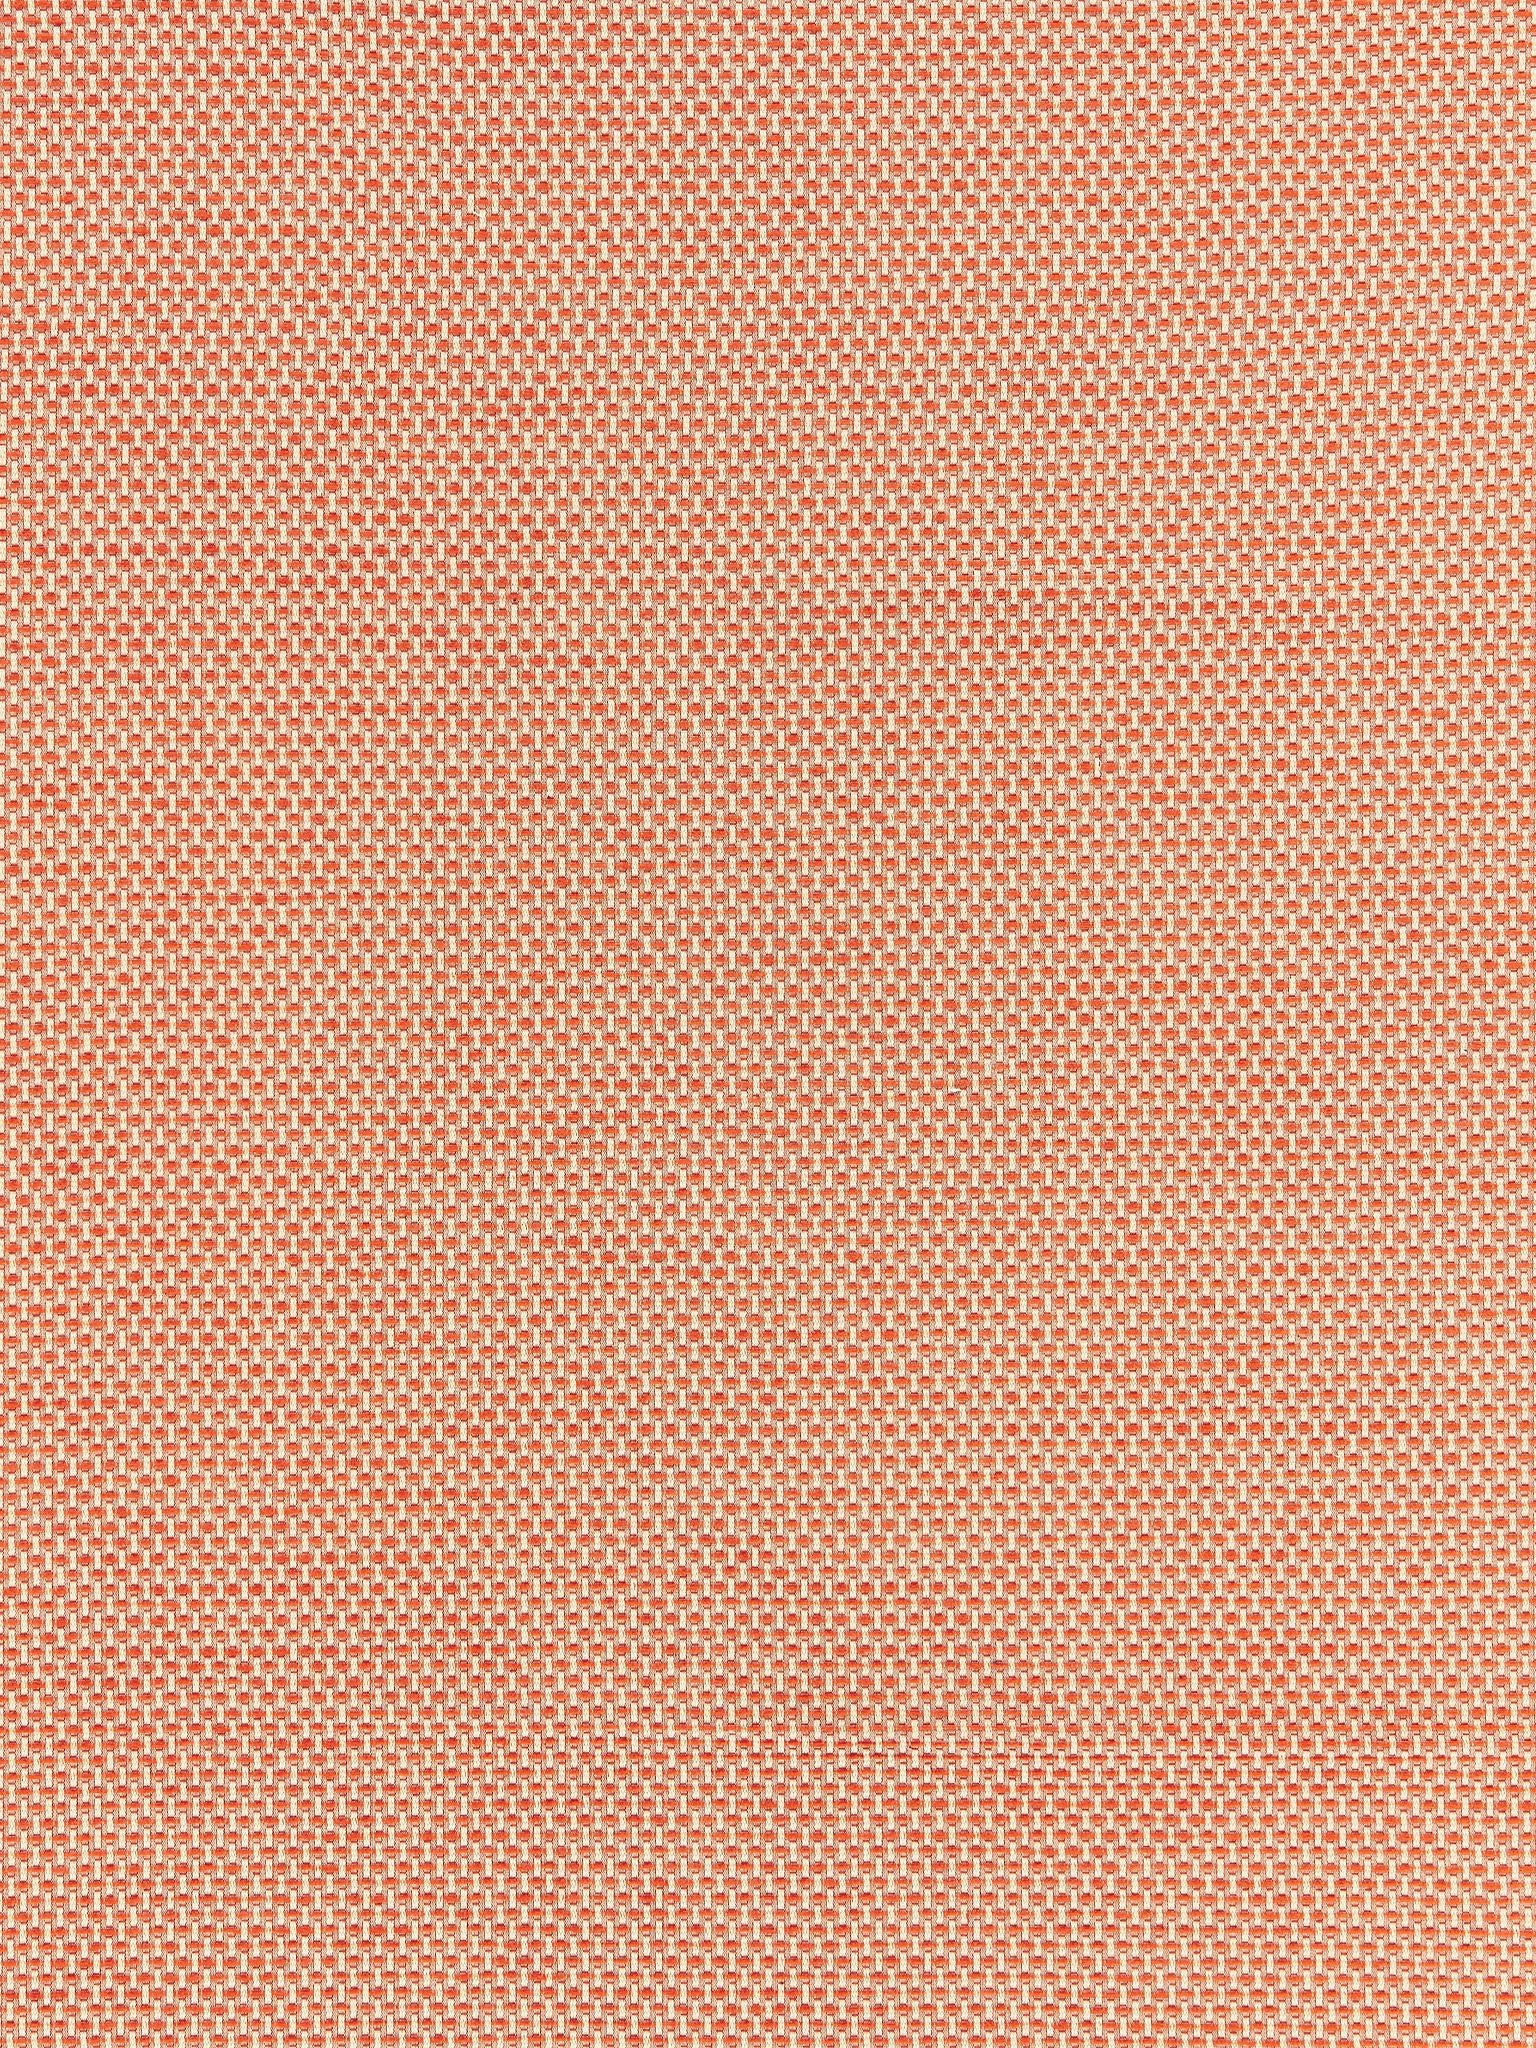 Berkshire Weave fabric in mandarin color - pattern number BK 0007K65115 - by Scalamandre in the Old World Weavers collection